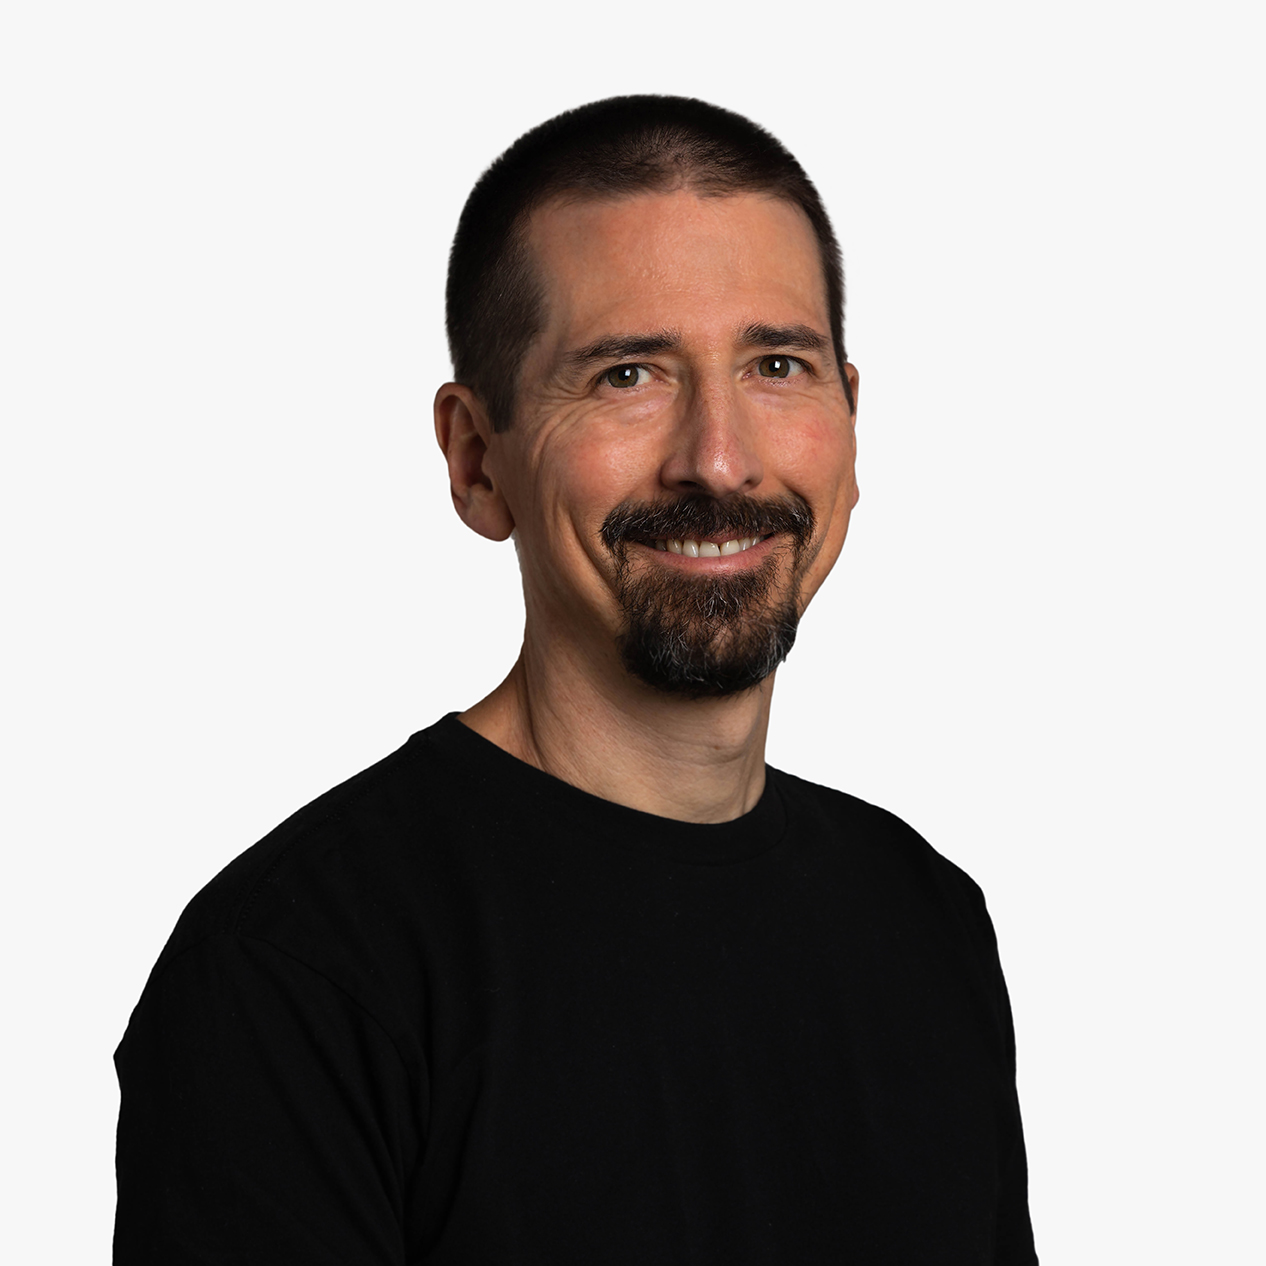 Bill Barbot, a white male in his mid-fifties, wearing a black t-shirt, close-cropped dark hair, and a goatee, photographed from the mid-chest up.